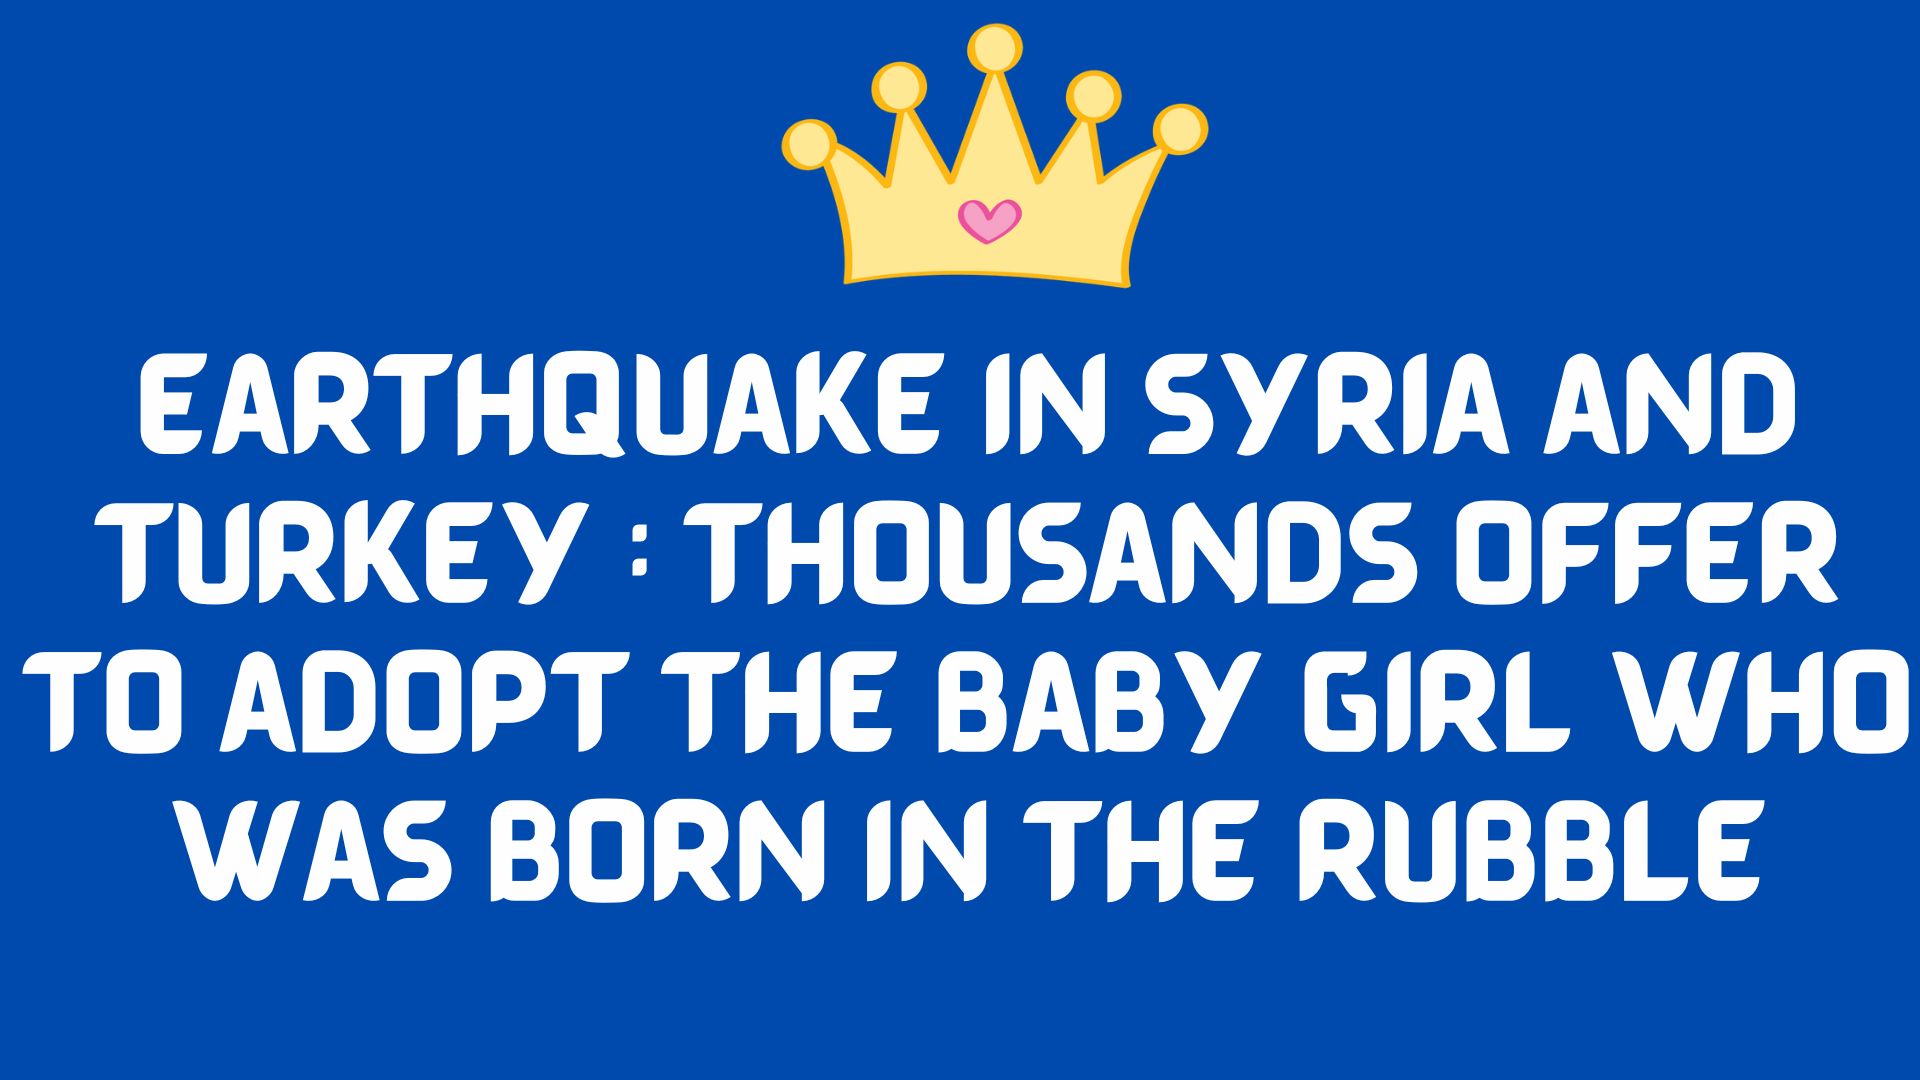 Earthquake in syria and turkey: thousands of offers to adopt the baby girl who was born in the rubble